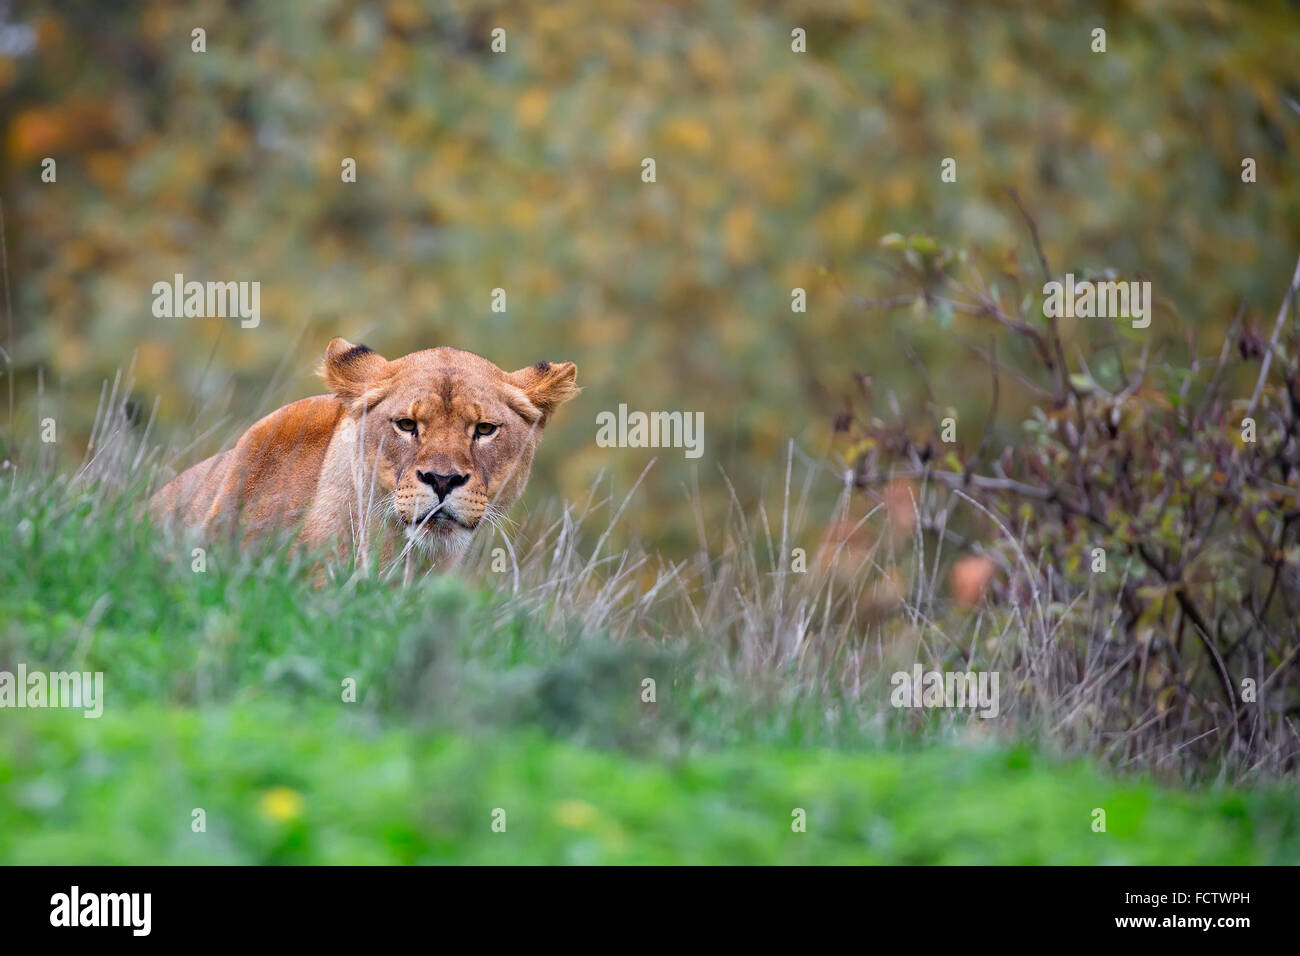 Lioness in the wild, in a clearing Stock Photo